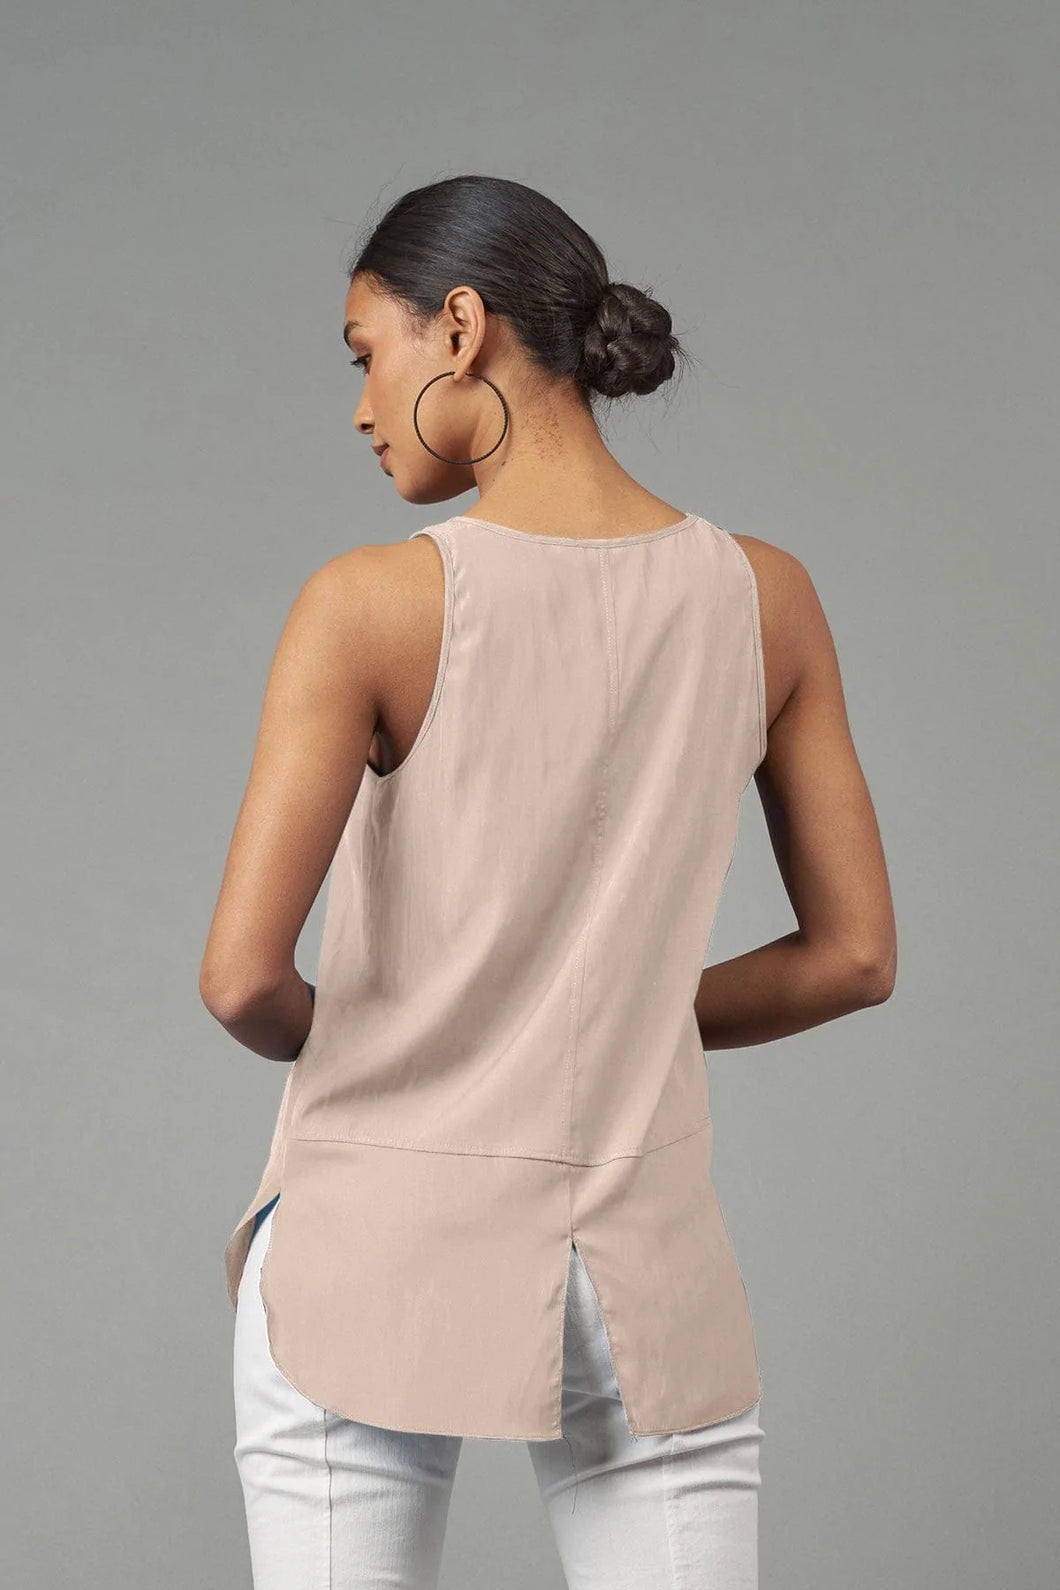 Satin tank top with split back detail by Lola & Sophie, a must-have essential.